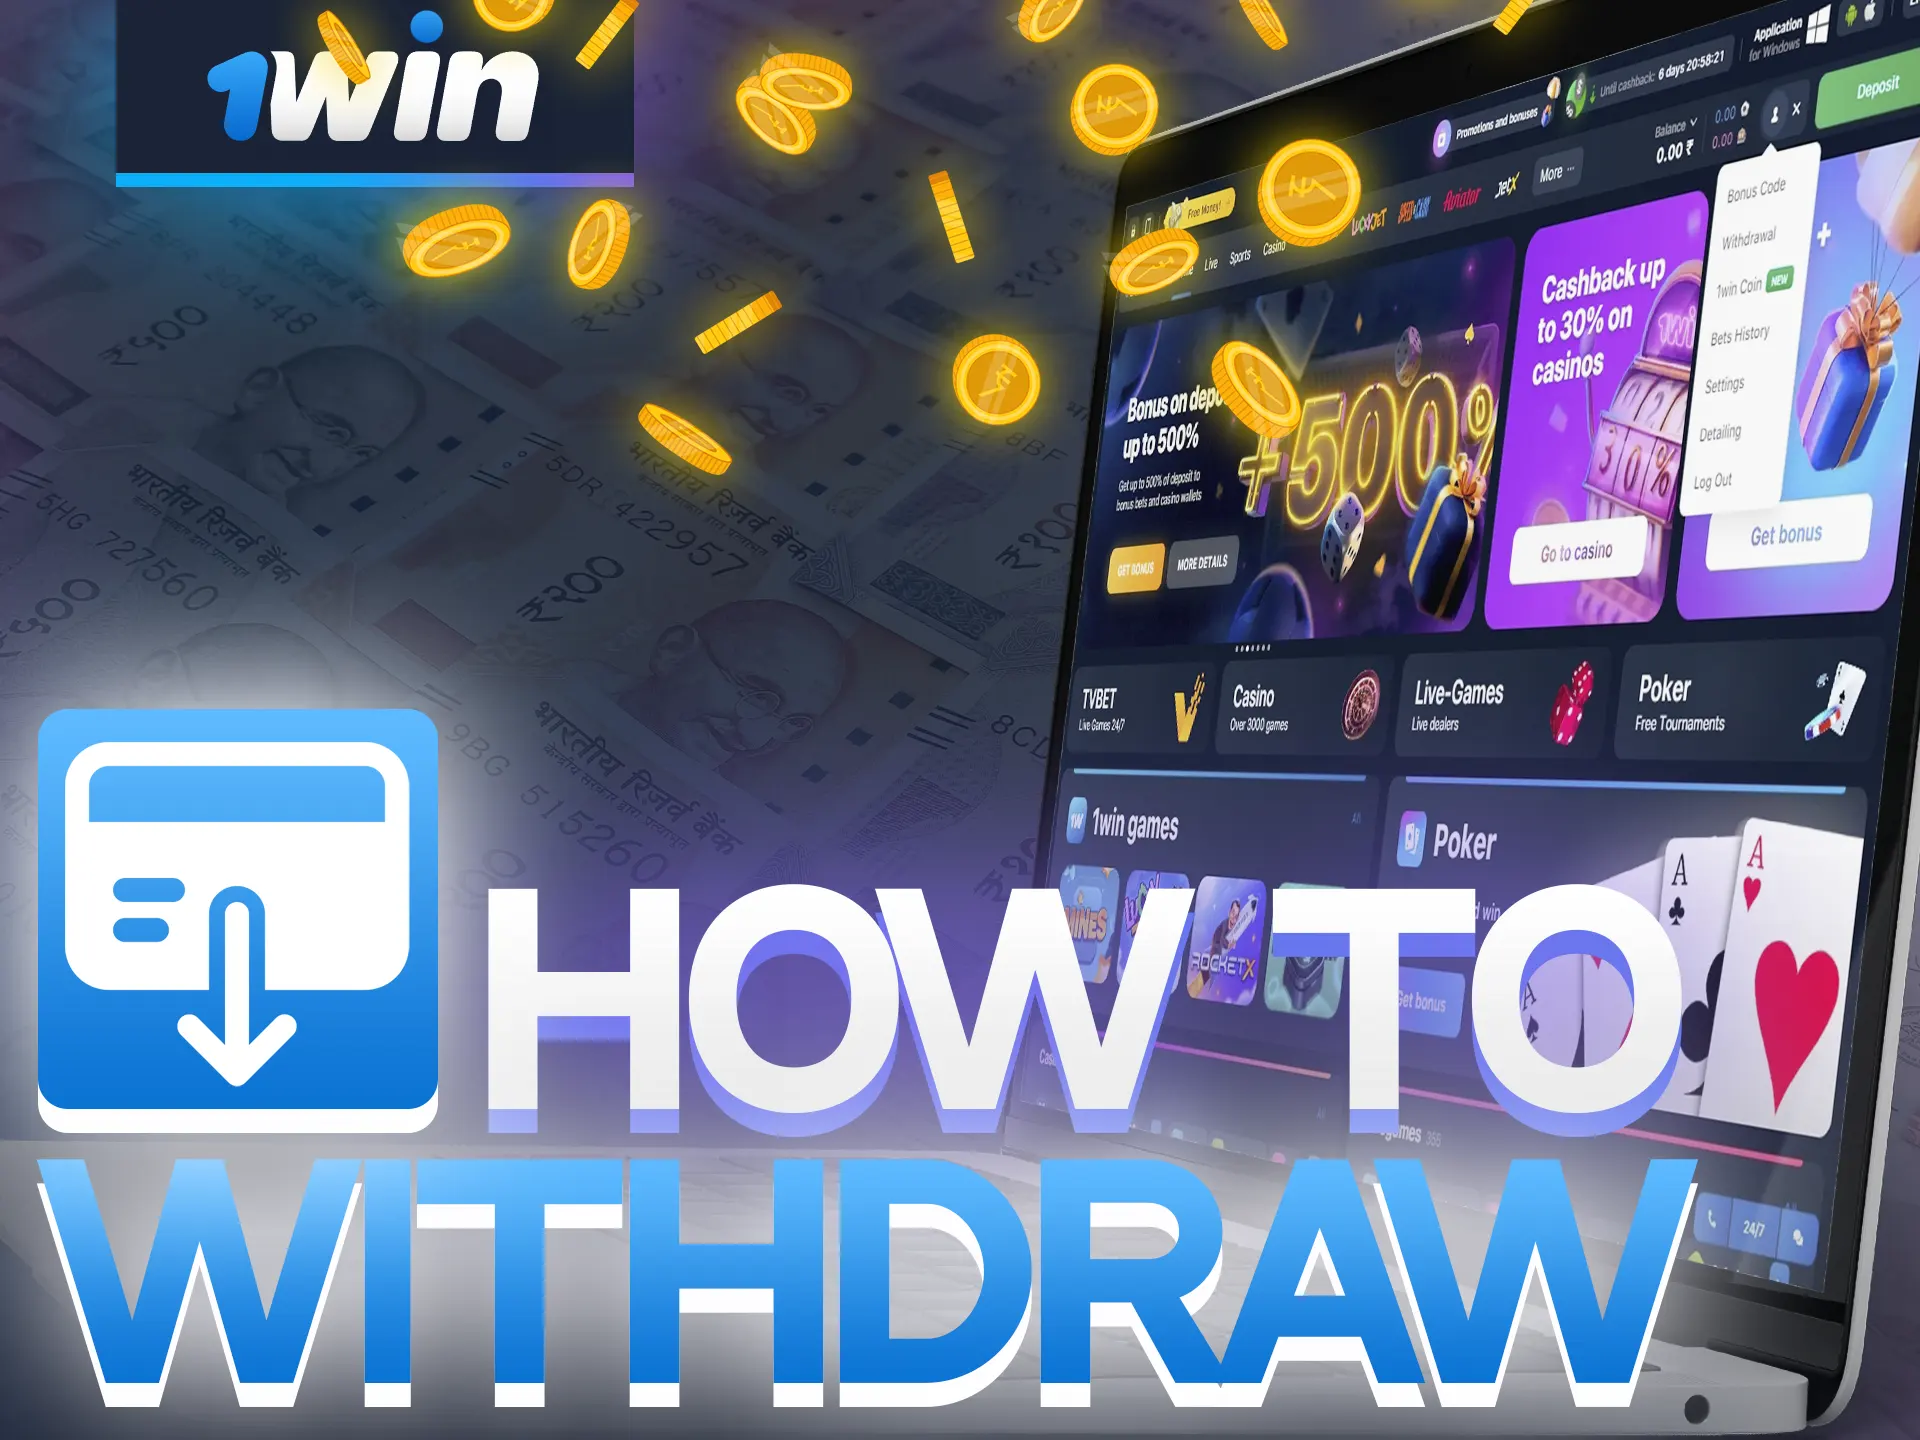 This instruction will help you learn how to withdraw money from 1win quickly.